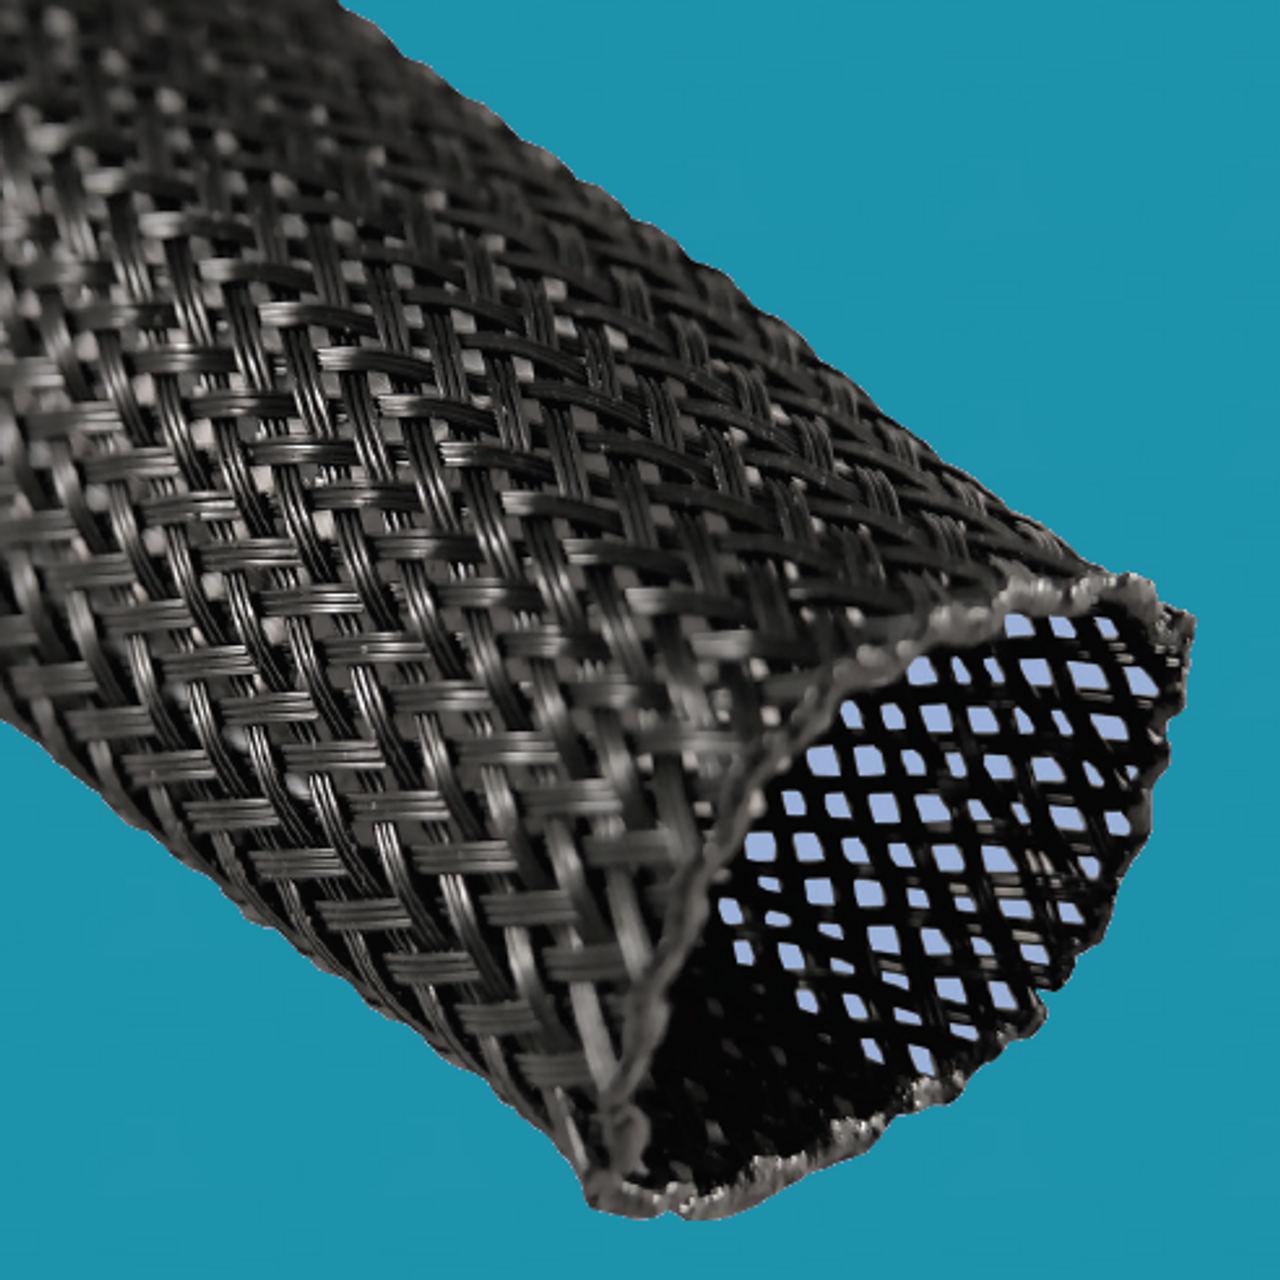 Braided Expanded Sleeving, Polyester, Expandable Sleeving